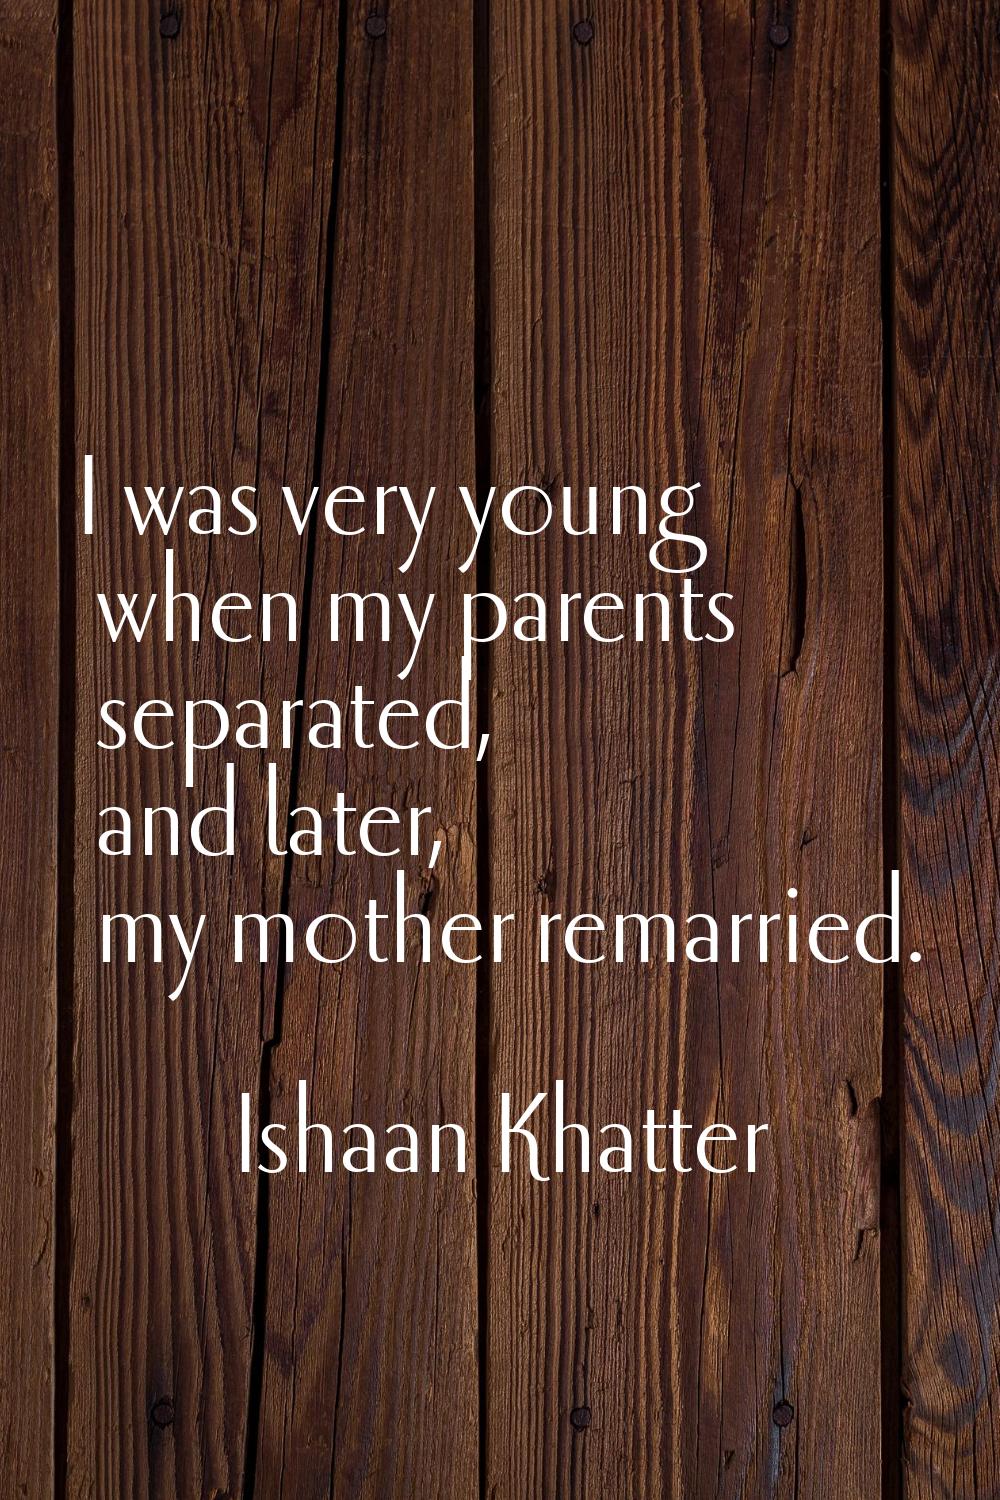 I was very young when my parents separated, and later, my mother remarried.